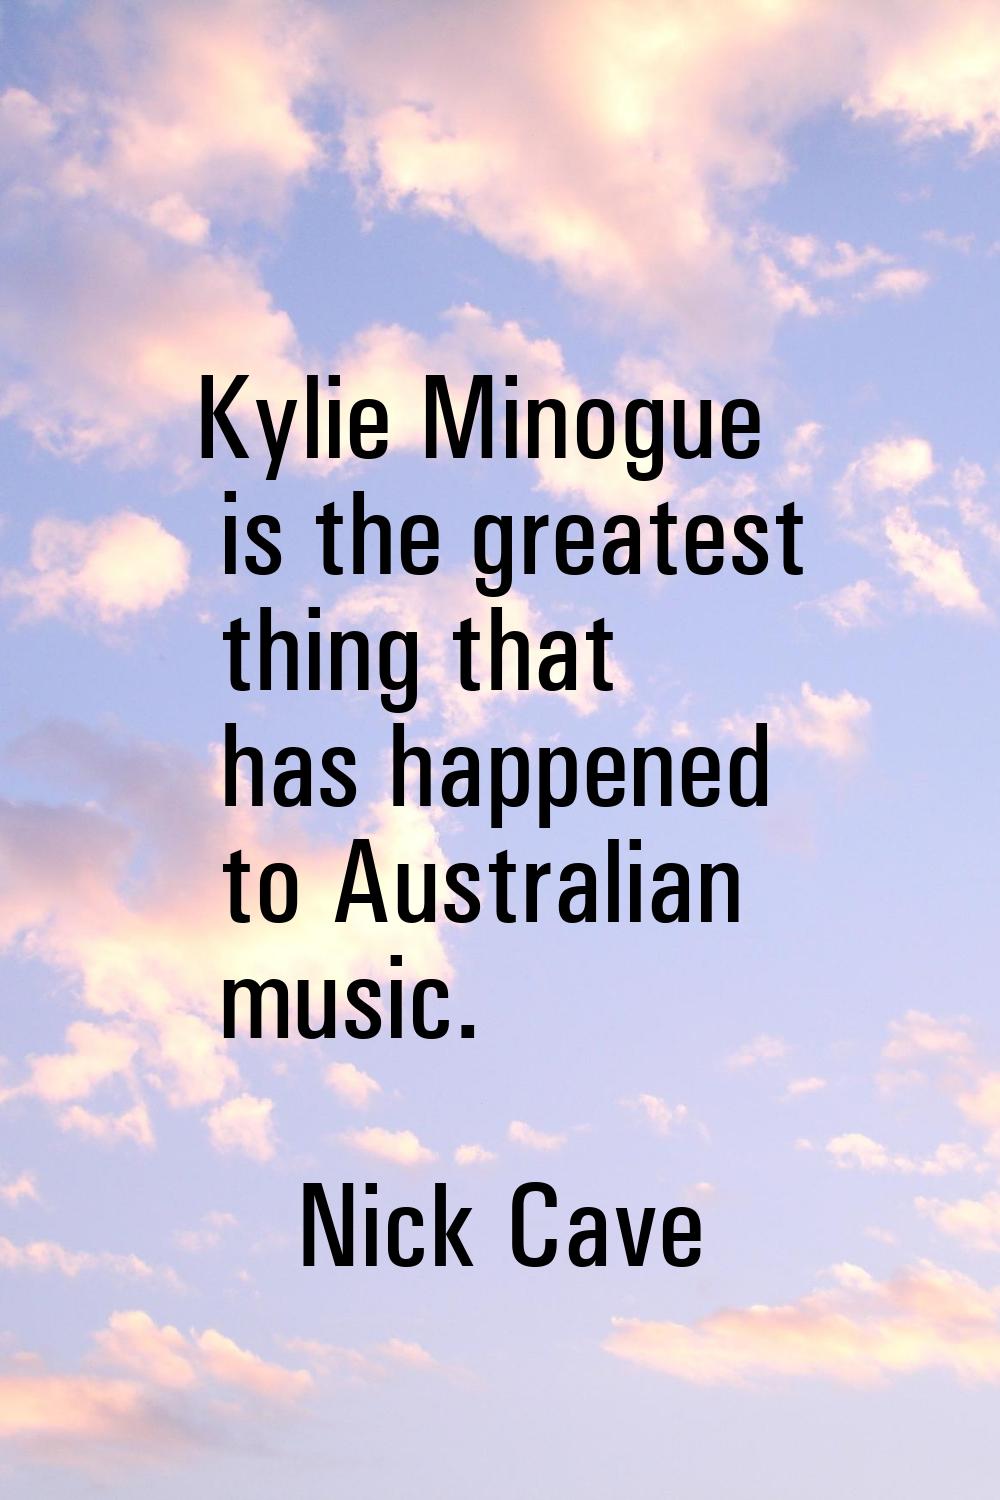 Kylie Minogue is the greatest thing that has happened to Australian music.